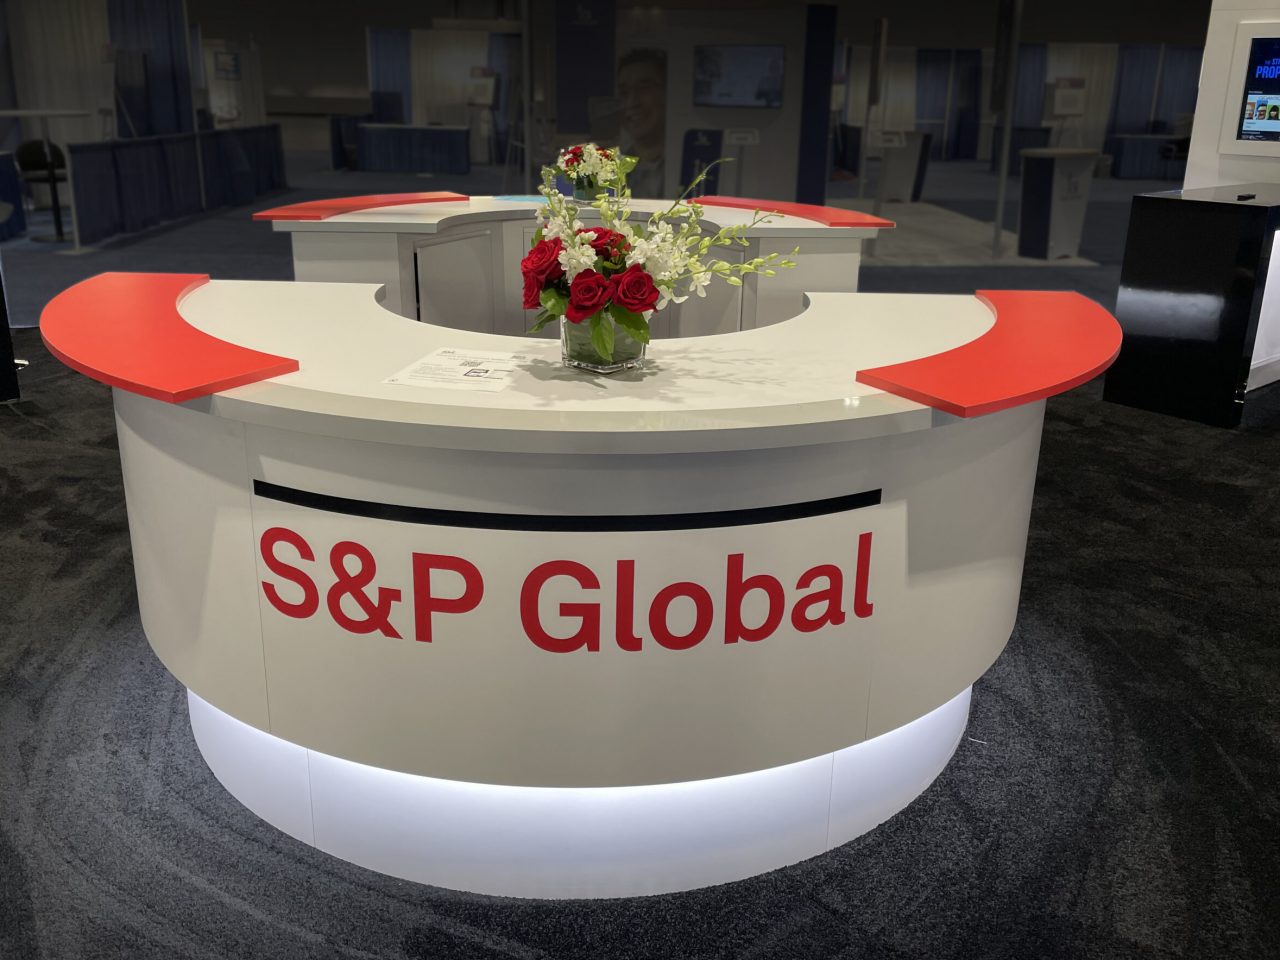 Reception Area of the S&P Global Exhibit at NBMBAA